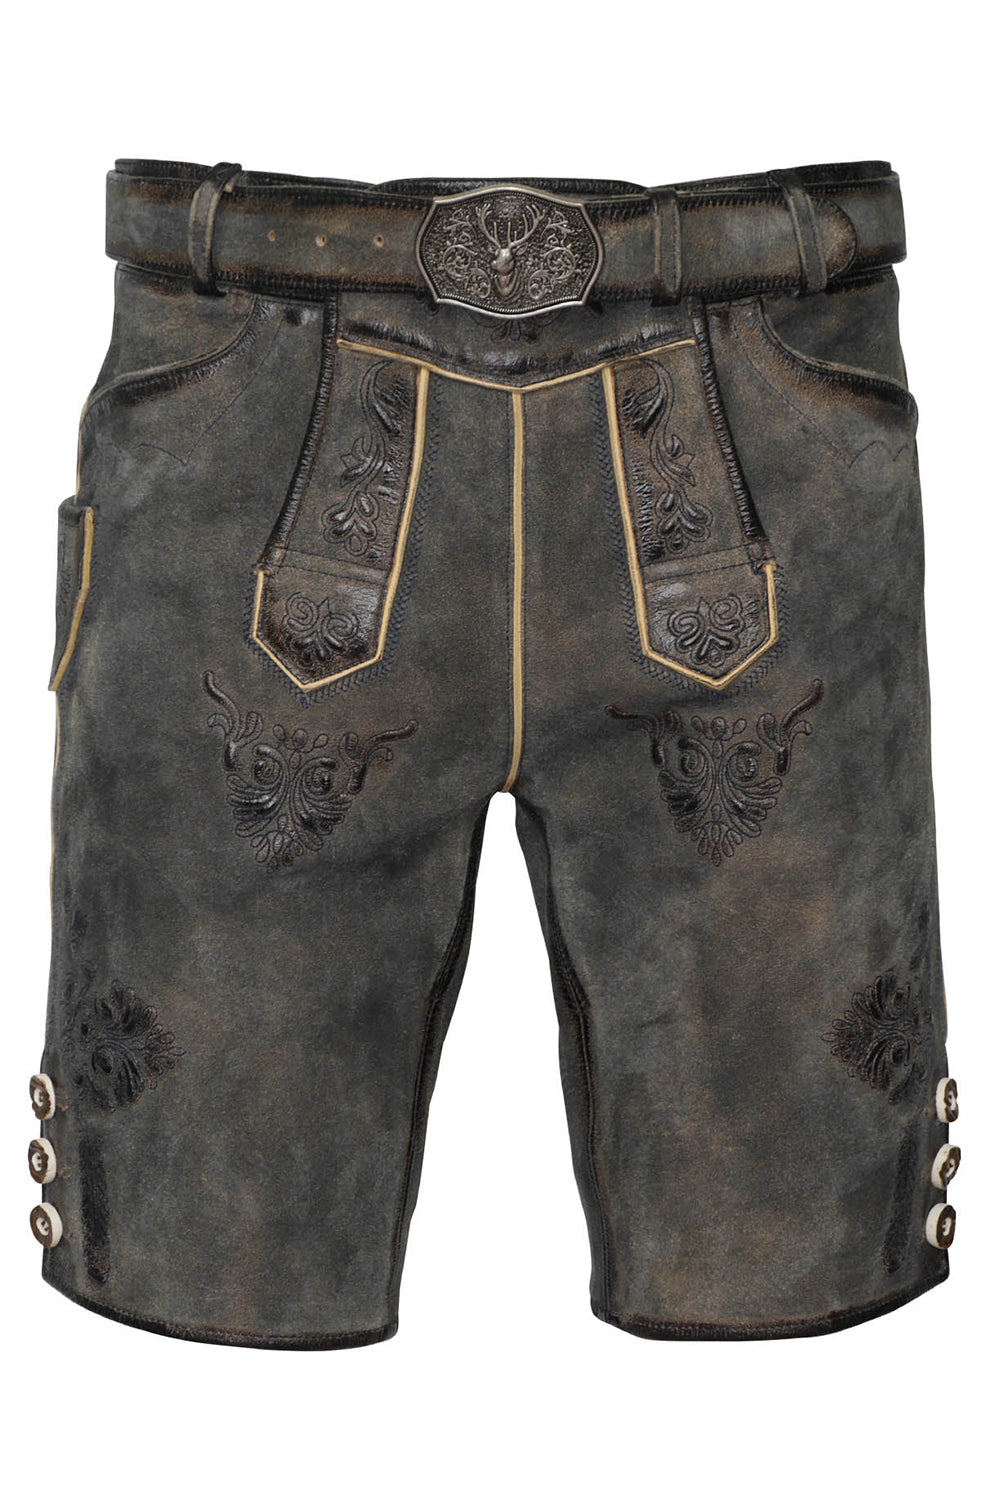 Men's leather trousers Baltic Sea